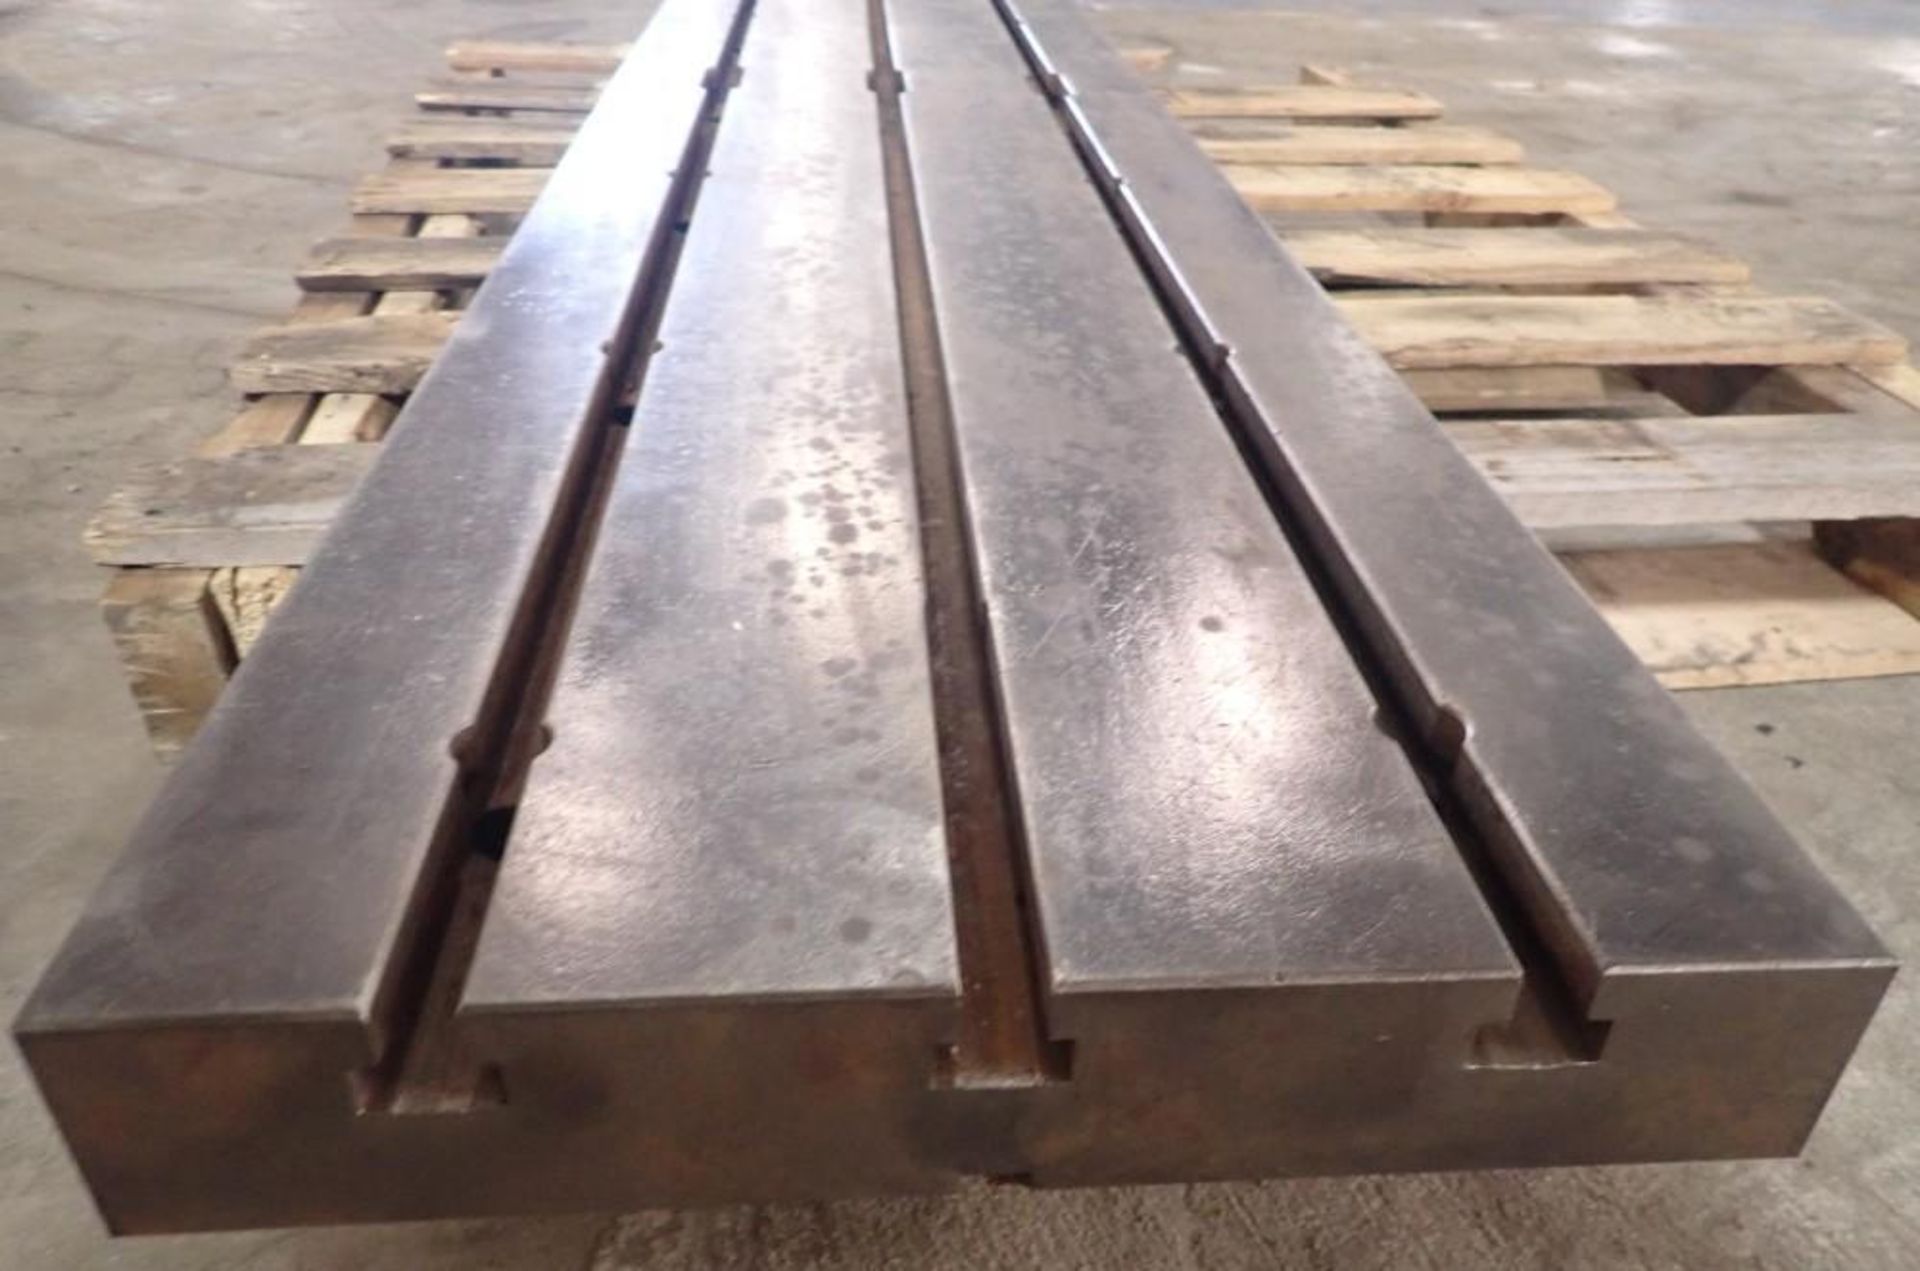 16" x 80" T-Slotted Steel Layout / Welding Table - Image 4 of 4